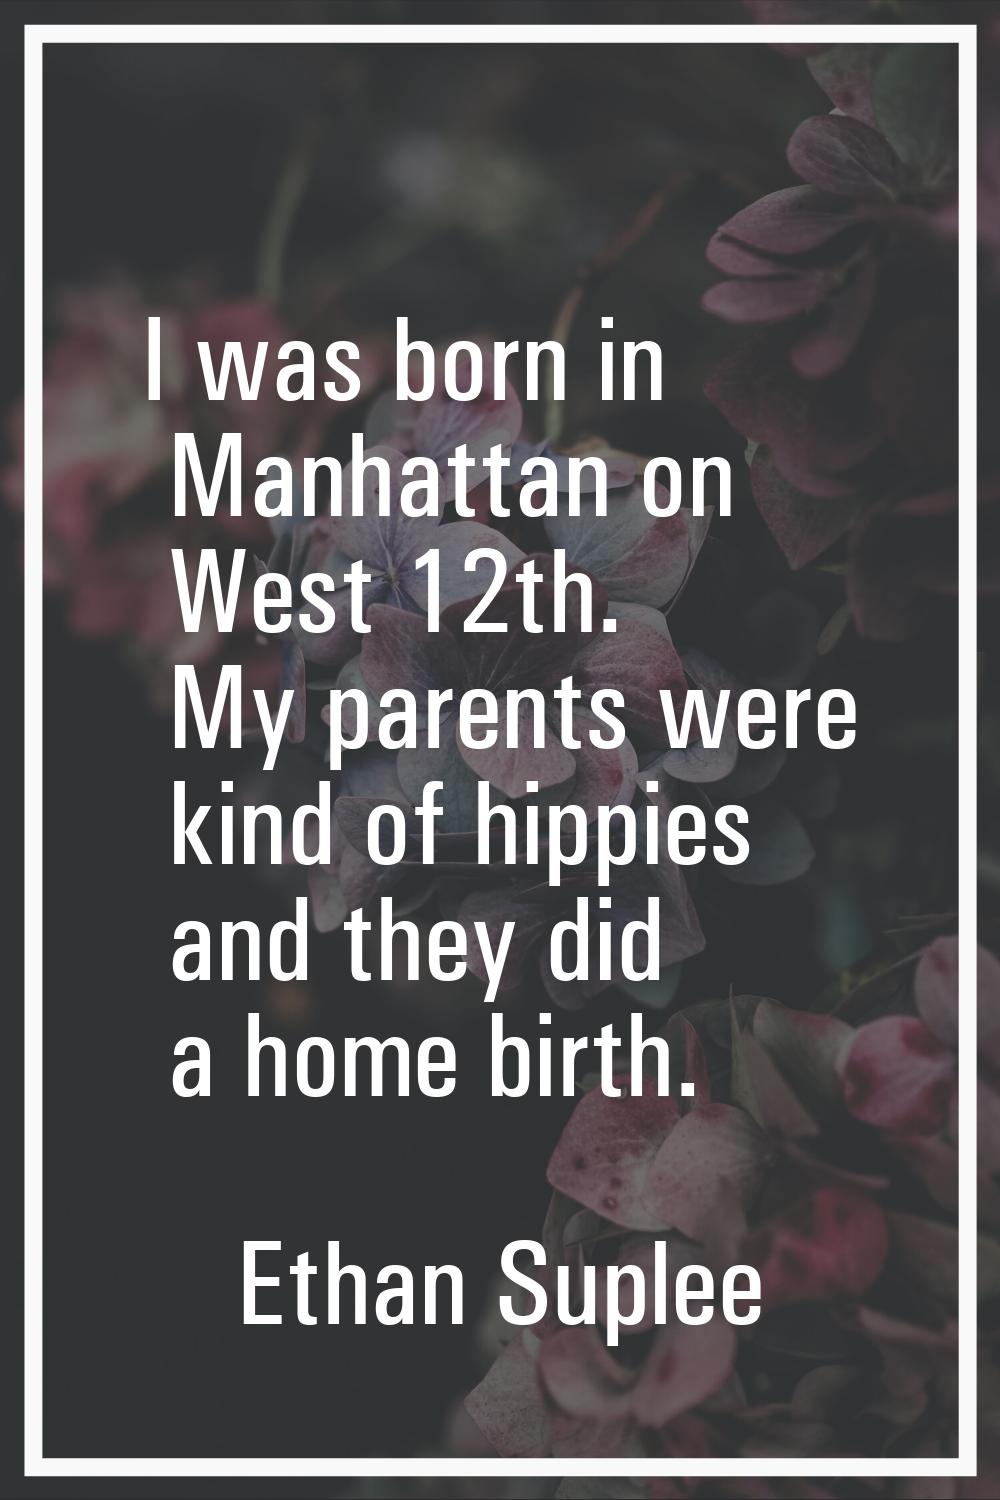 I was born in Manhattan on West 12th. My parents were kind of hippies and they did a home birth.